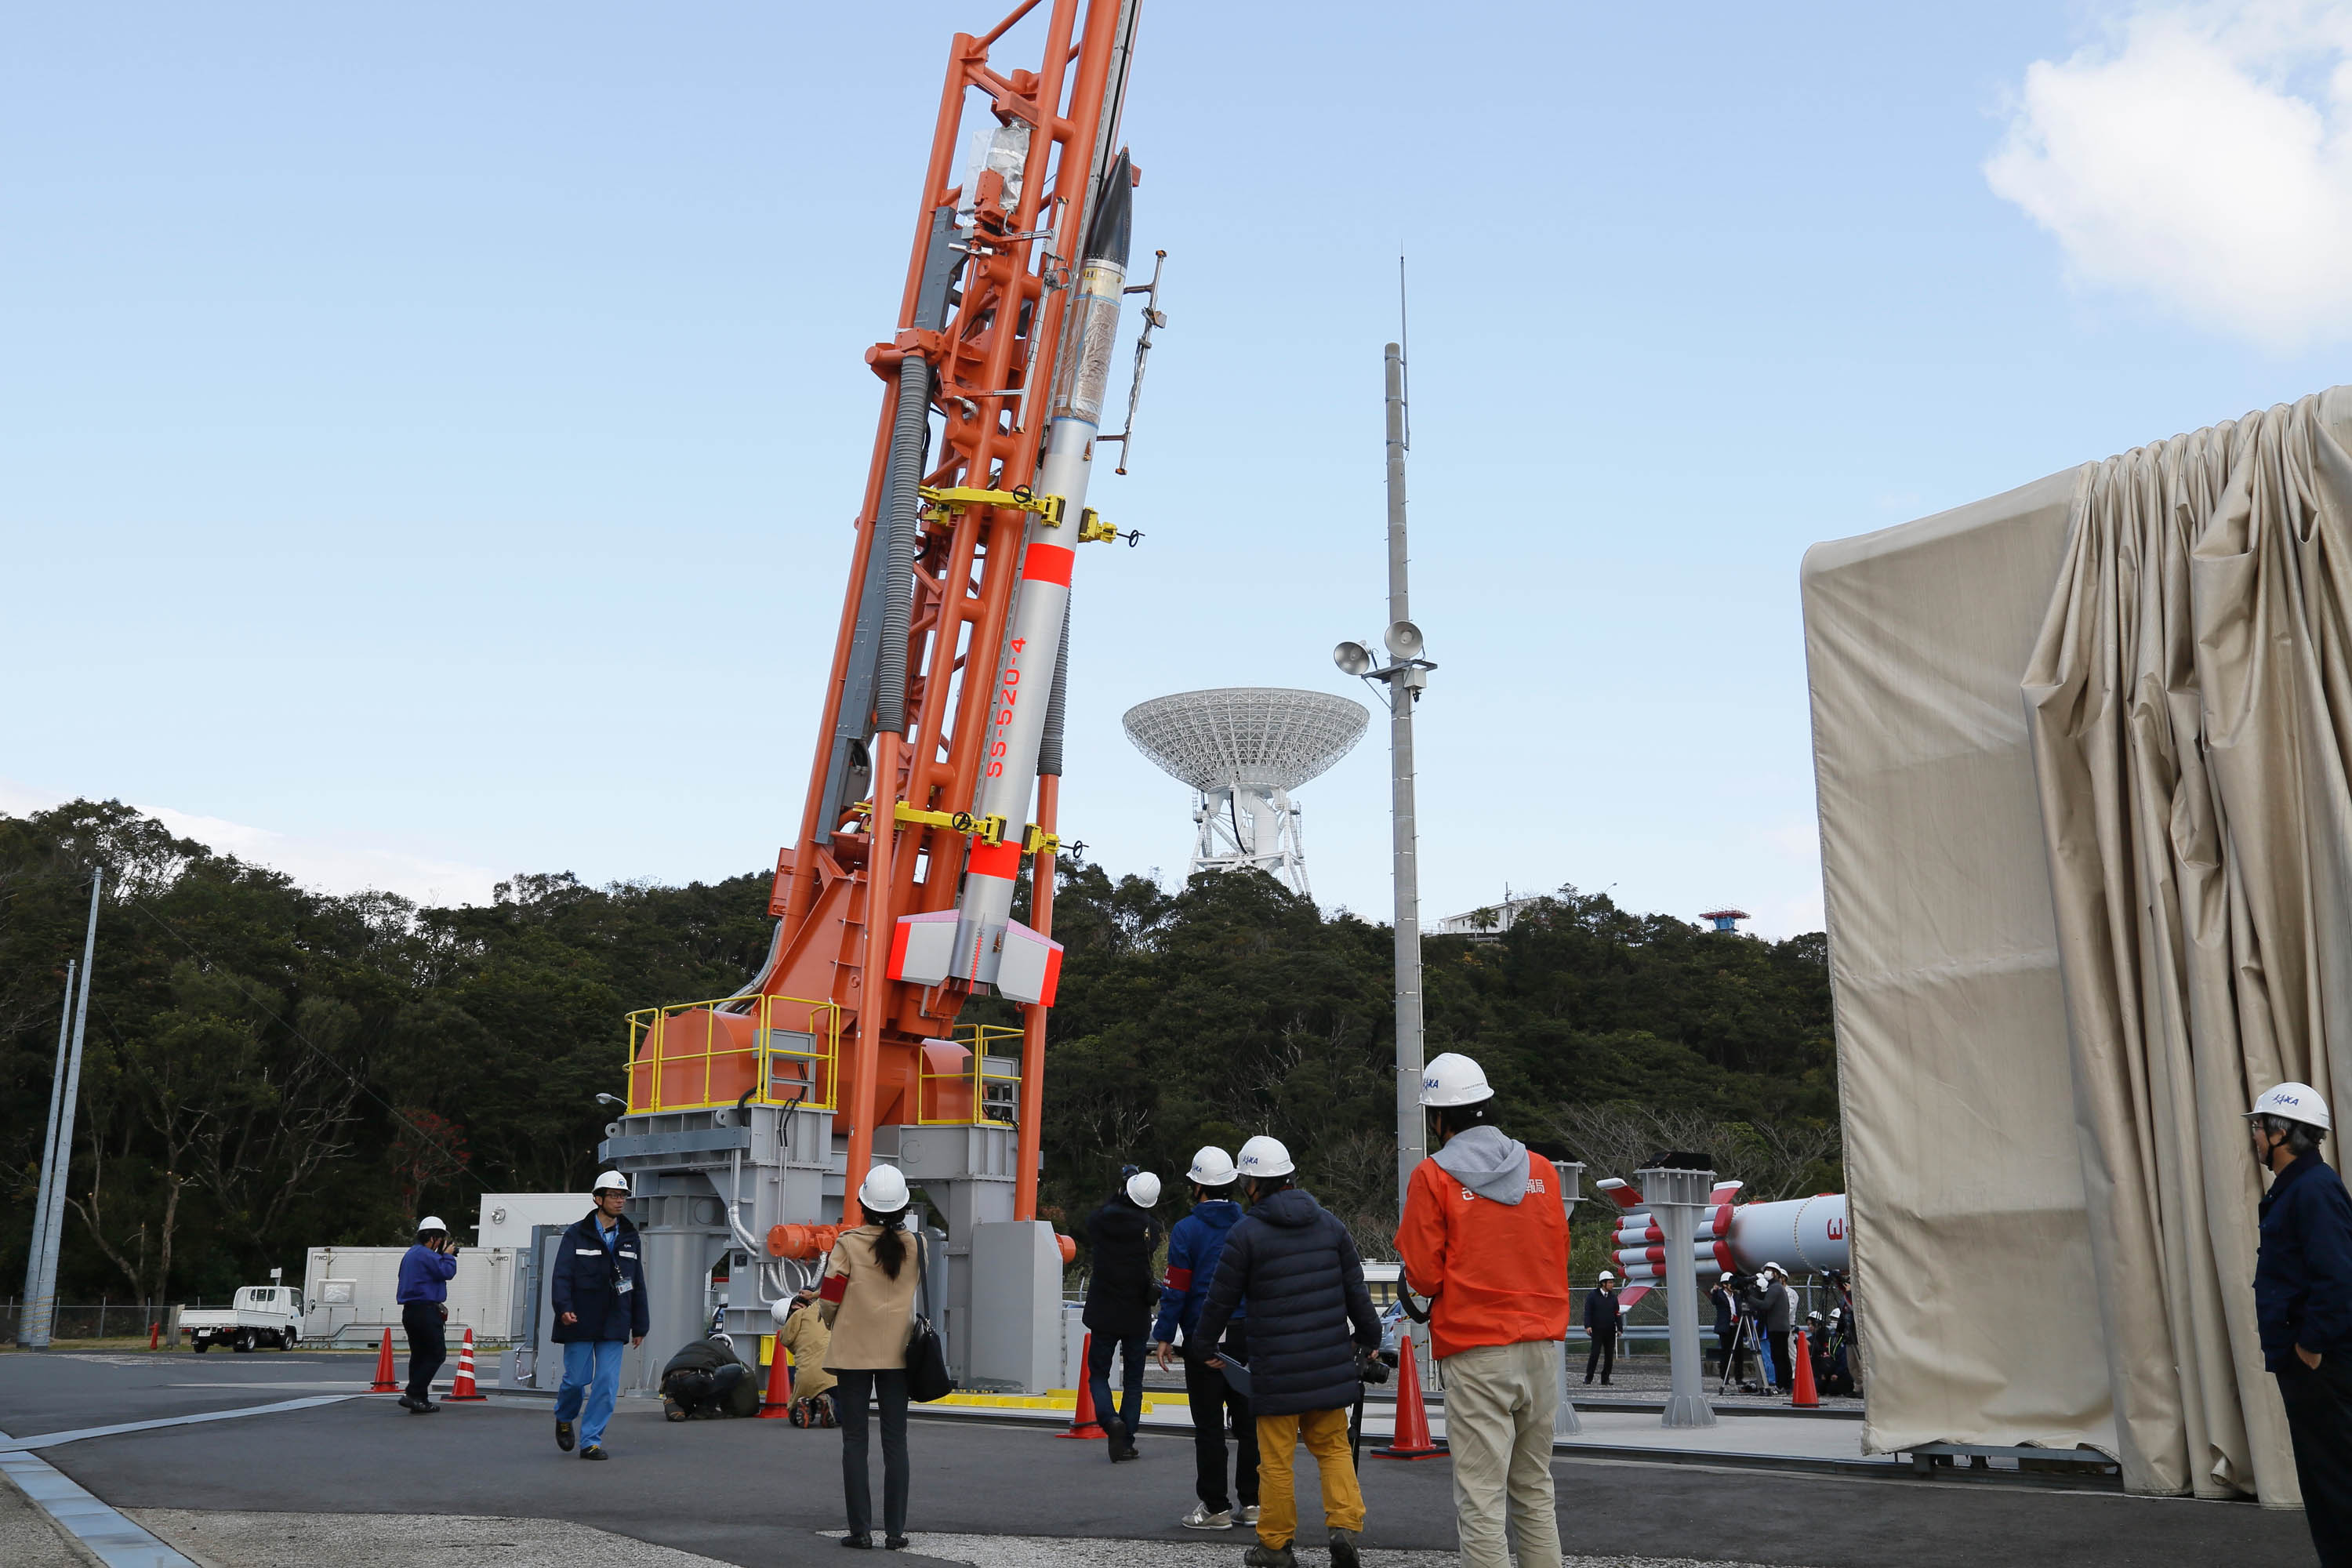 Japan's Small Experimental Rocket Fails to Launch Tiny Satellite